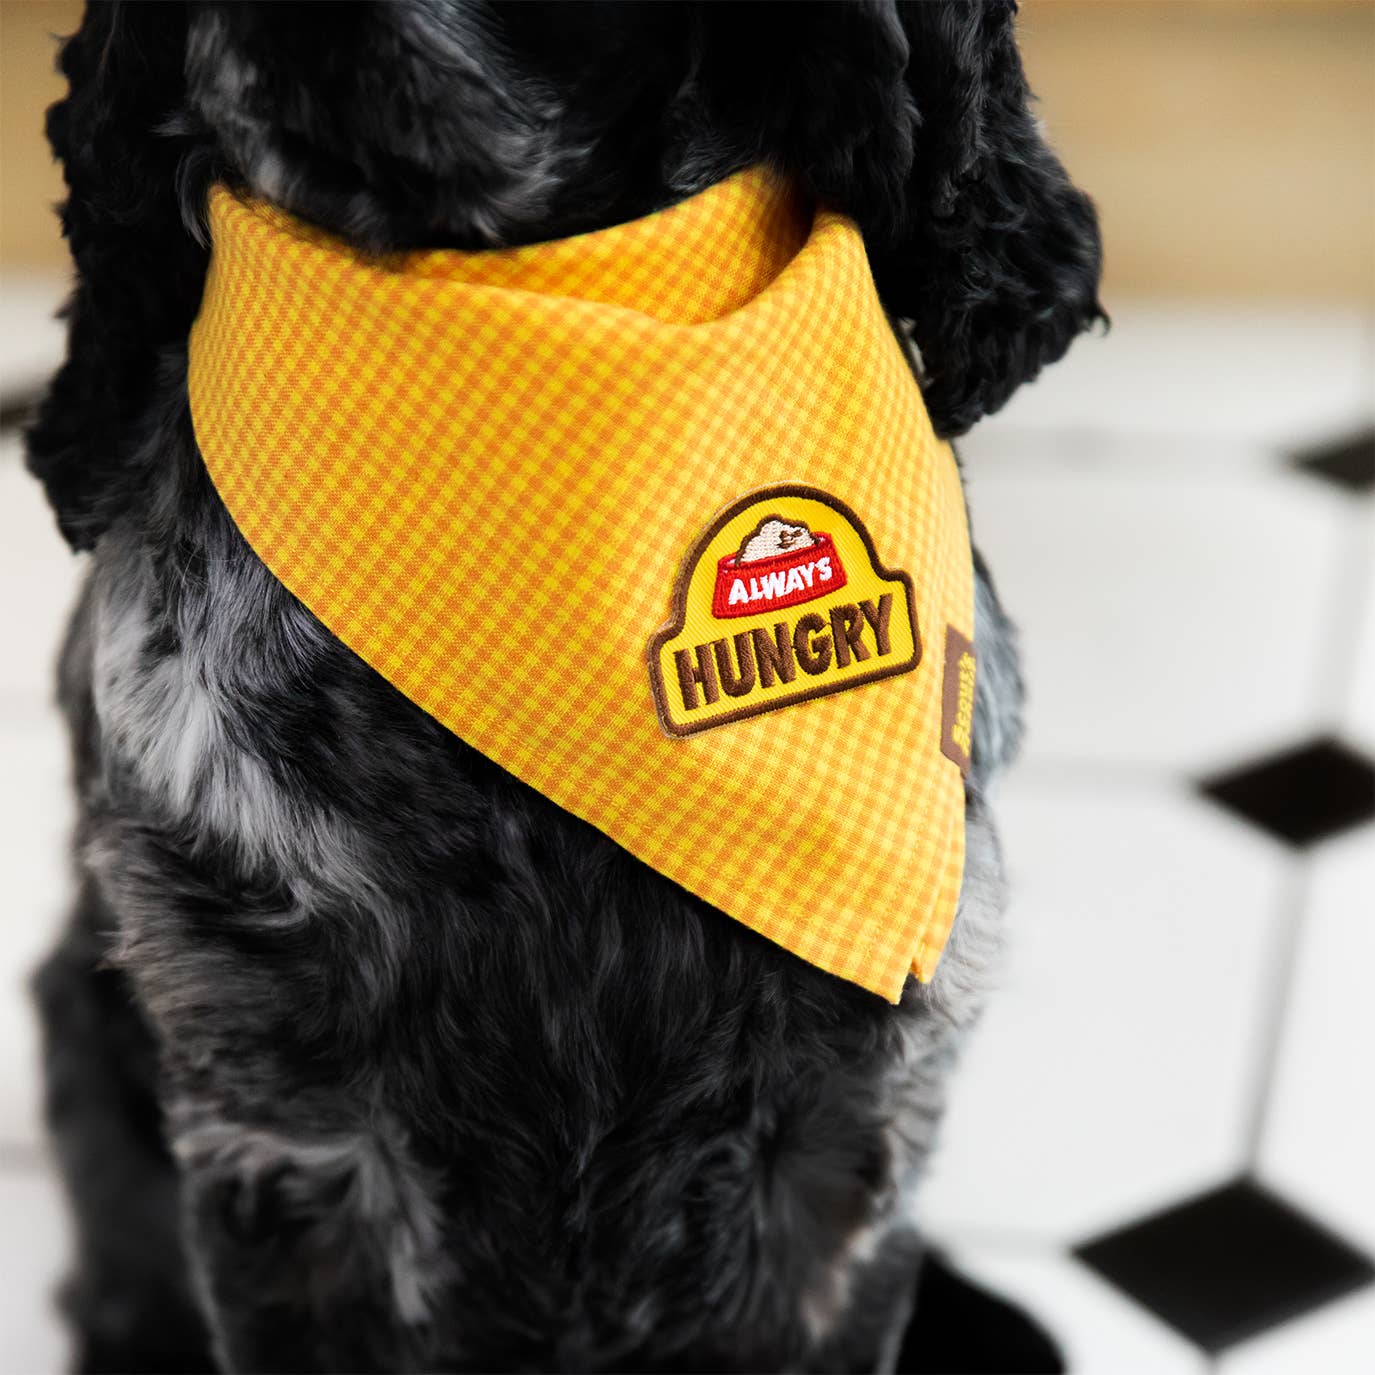 Scout's Honour - Always Hungry iron-on patch for dogs